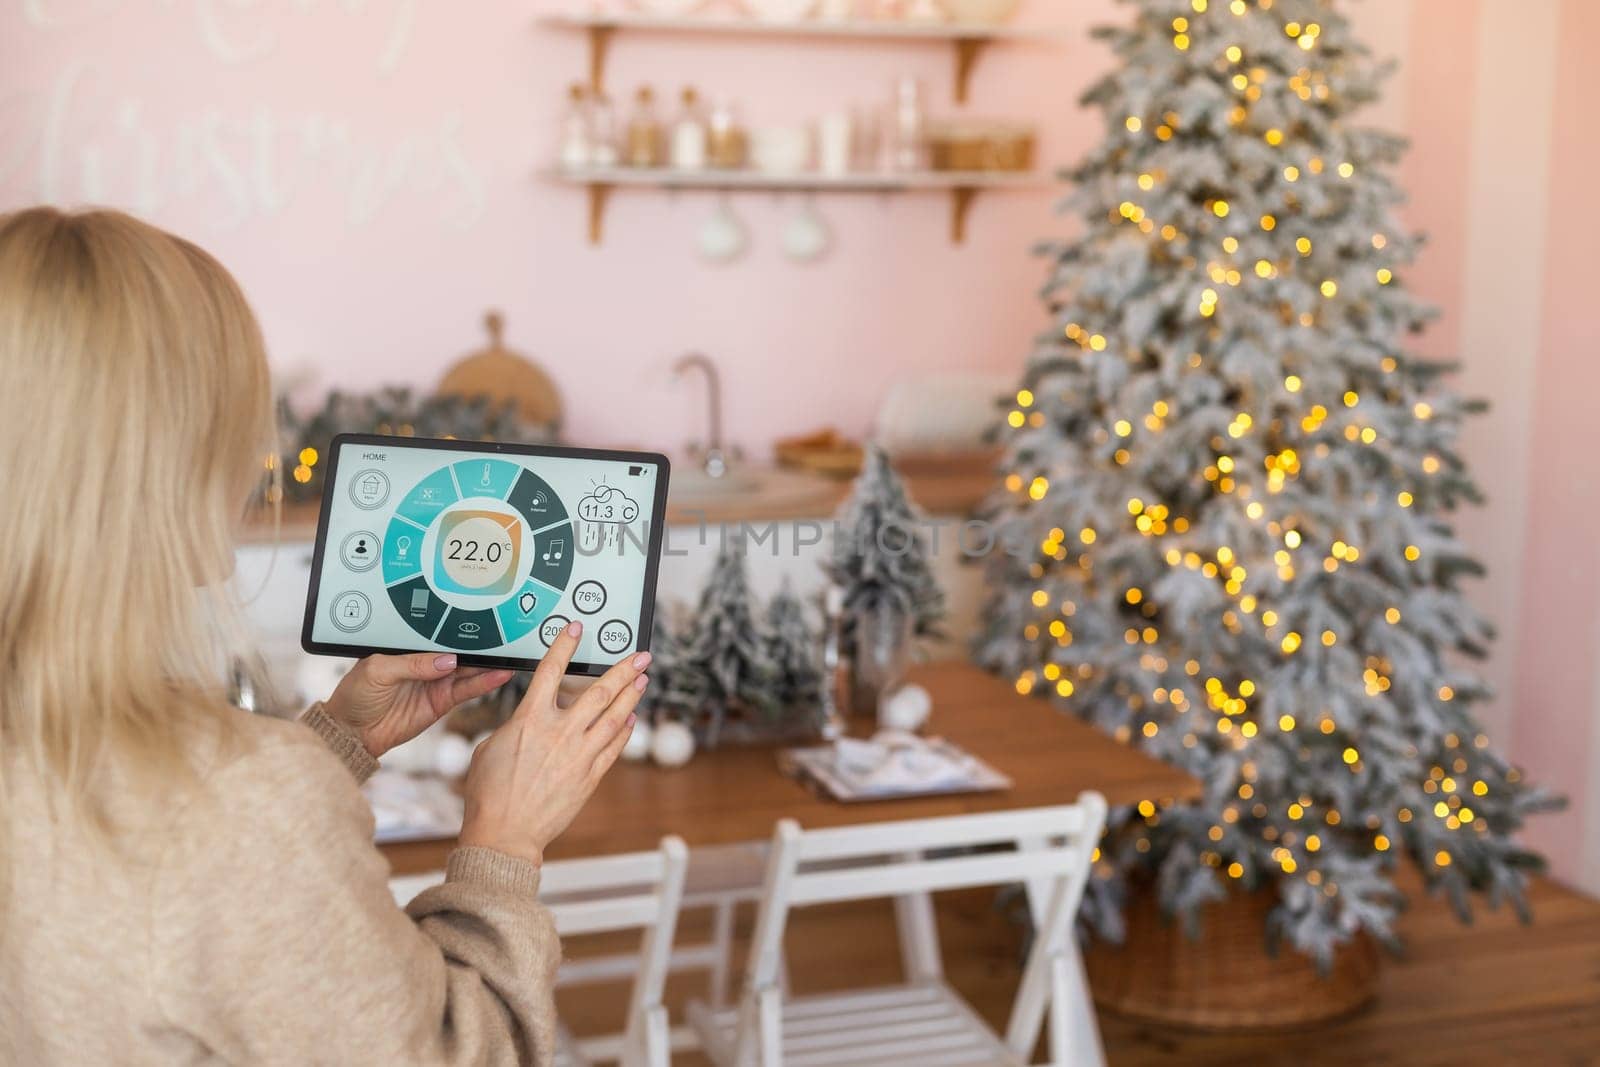 Modern home smart automation app on tablet display in woman hands at Christmas.